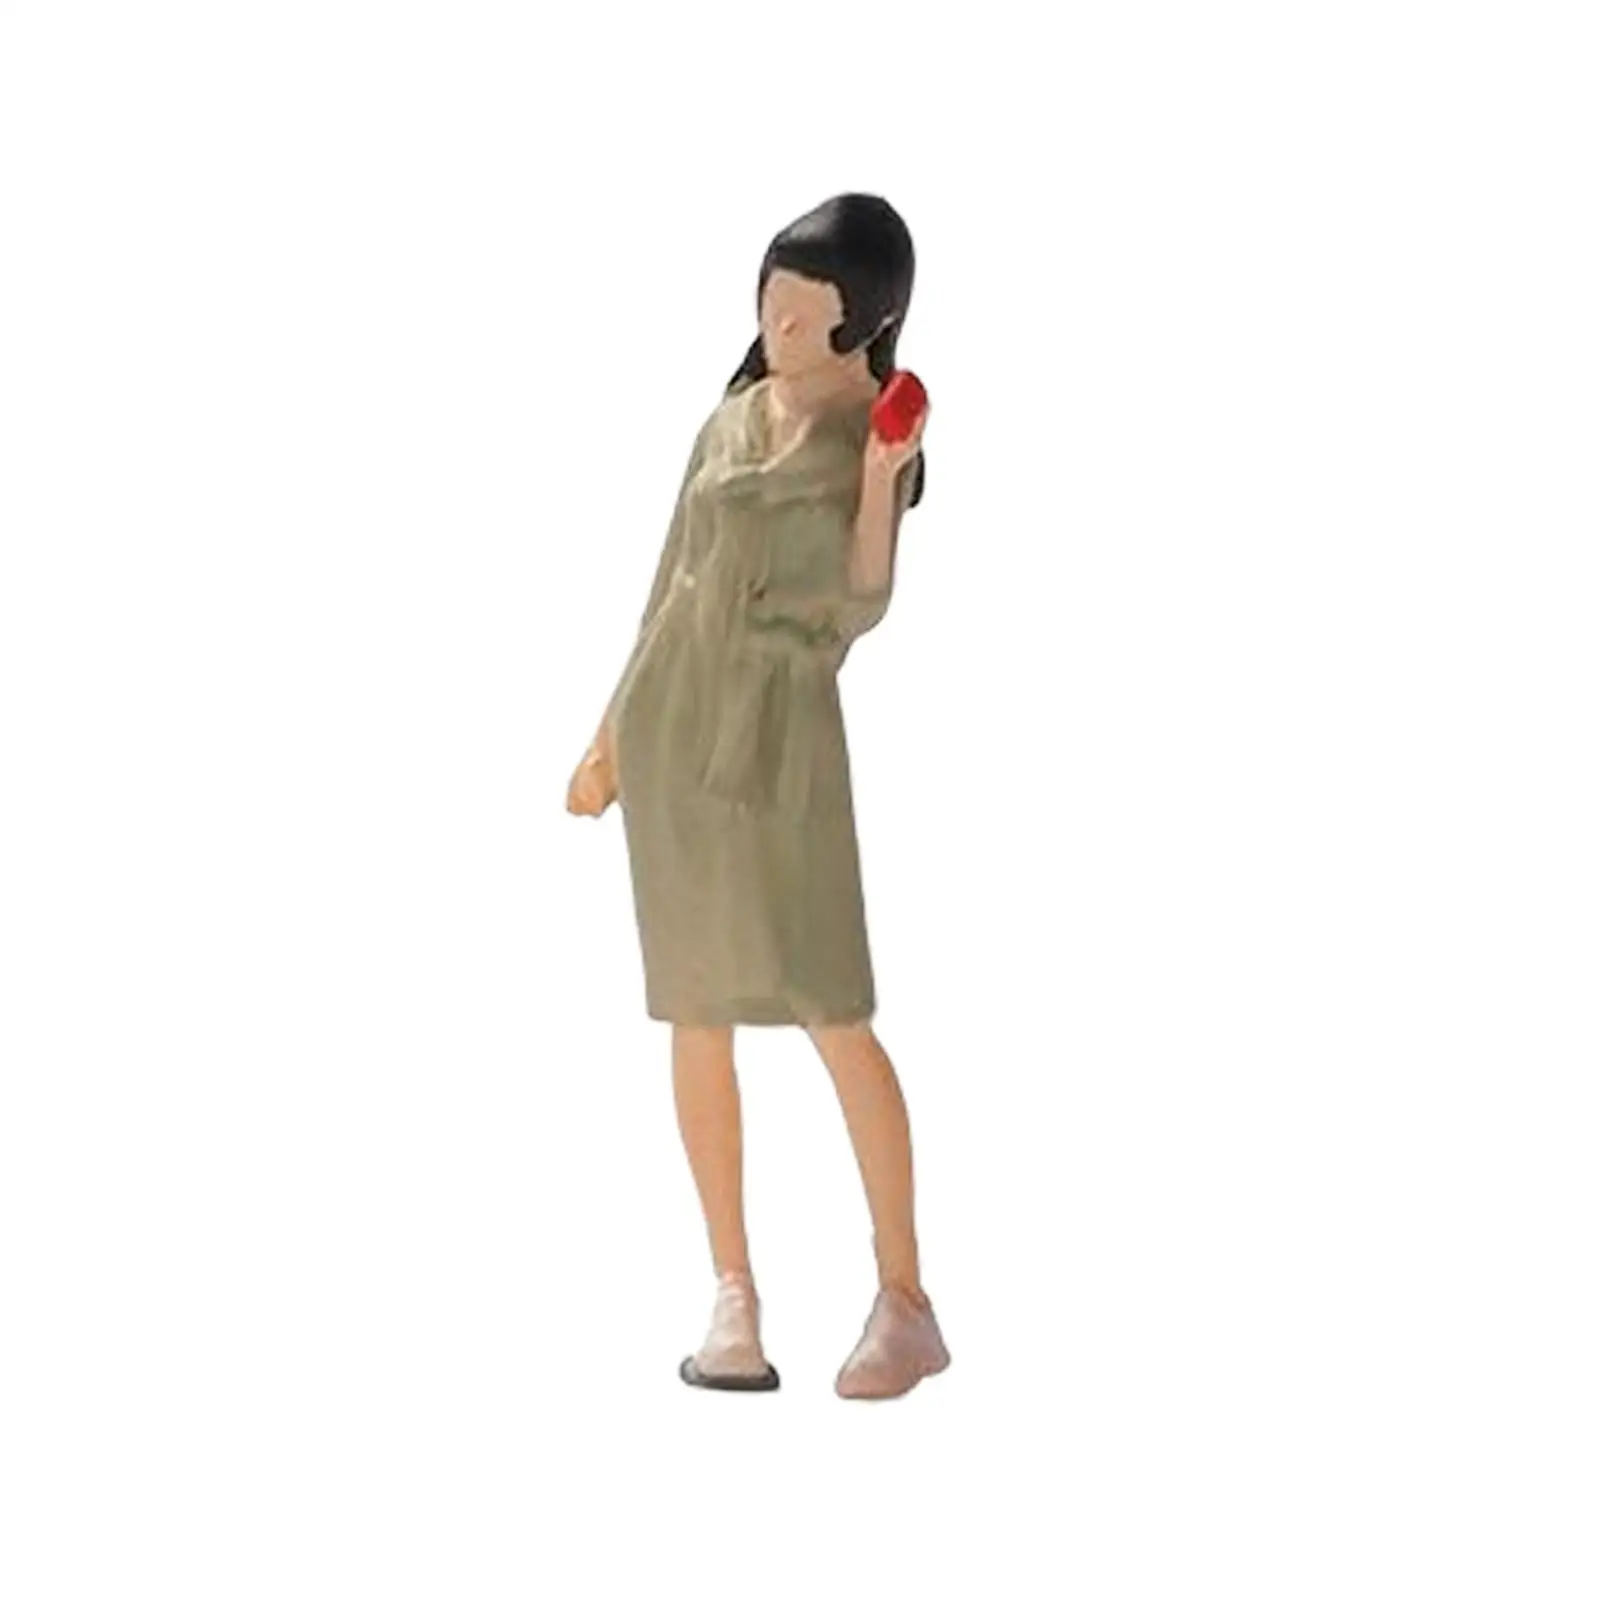 Painted Figures Architectural Realistic with Cola Resin Role Play Figure Girl People Figurine for Miniature Scene Sand Table